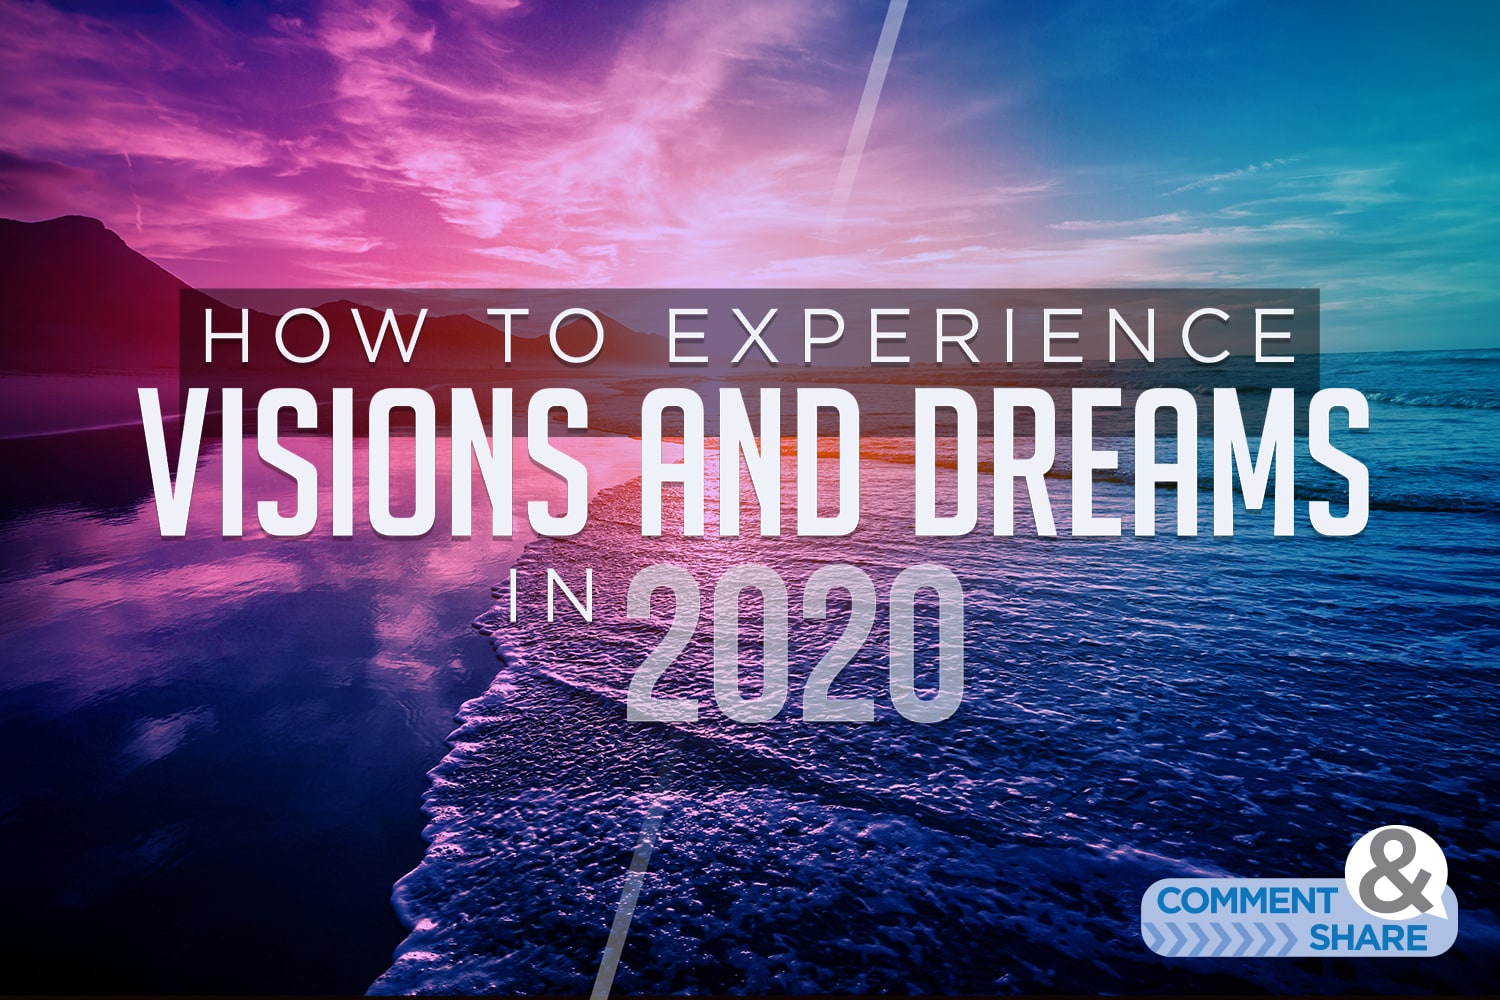 How to Experience Dreams and Visions in 2020